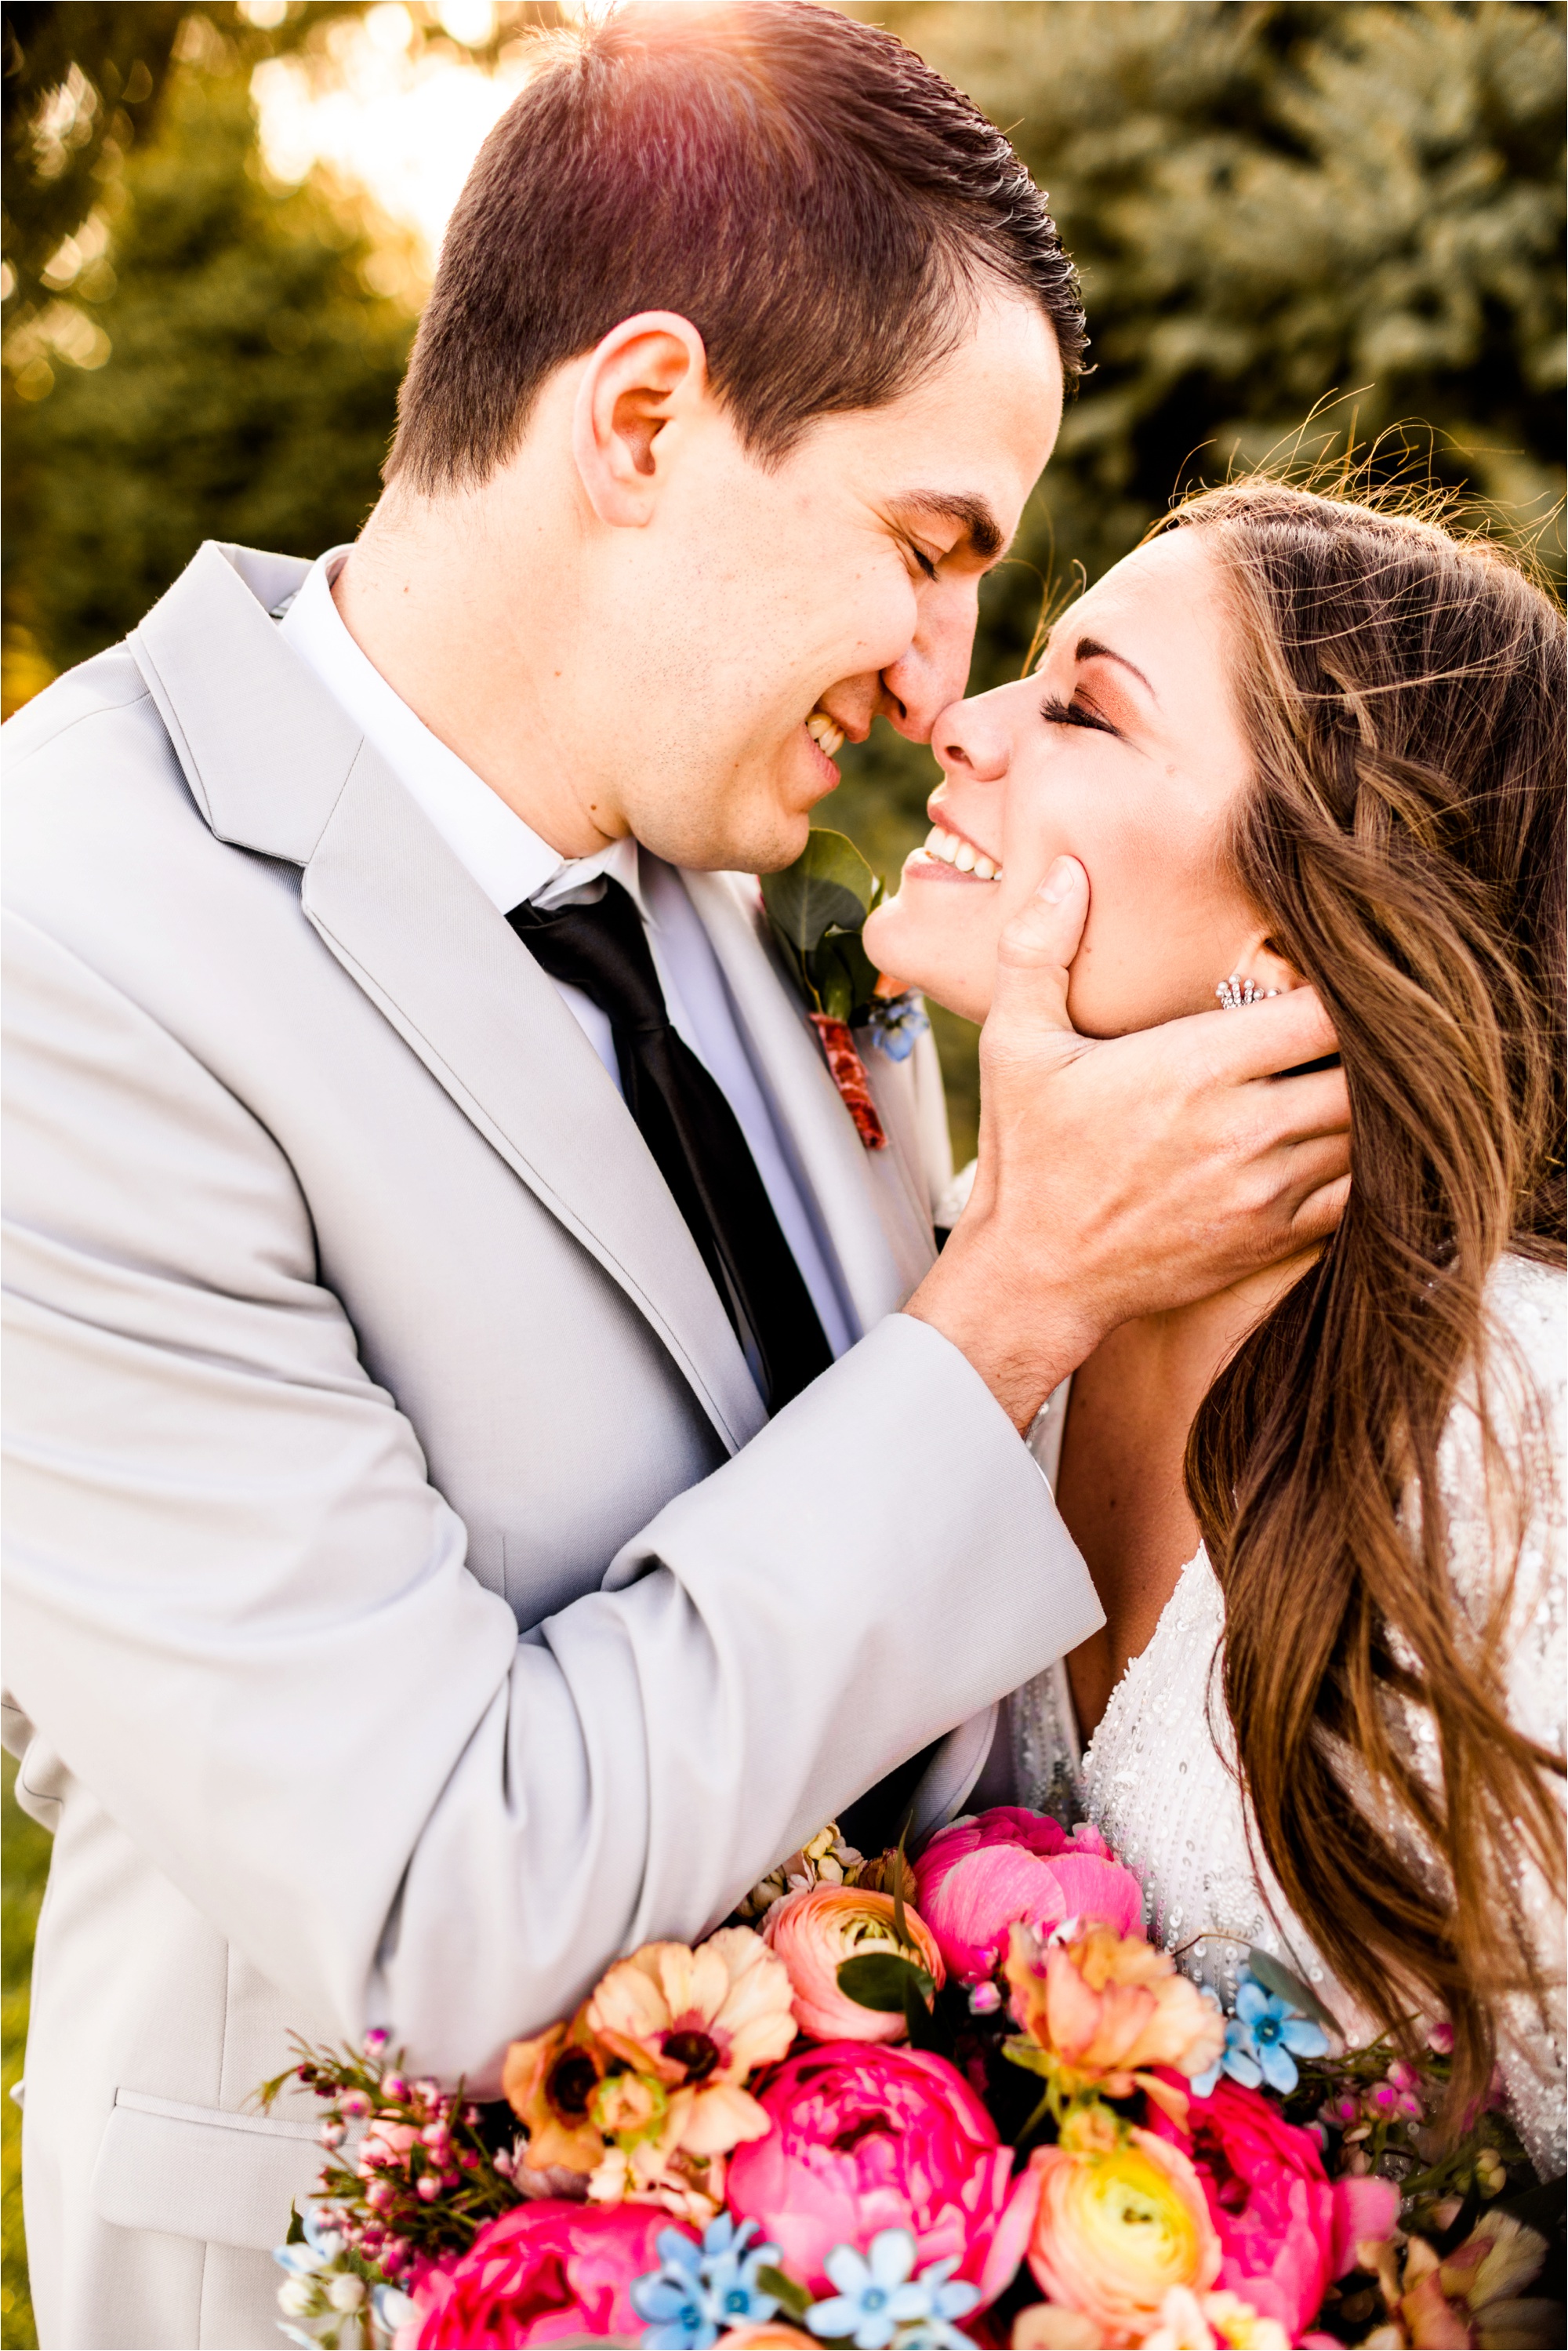 Caitlin and Luke Photography, Illinois Wedding Photographers, Champaign Wedding Photographers, Bloomington Normal Wedding Photographers, Romantic Red and Pink Sunset Styled Shoot_9572.jpg